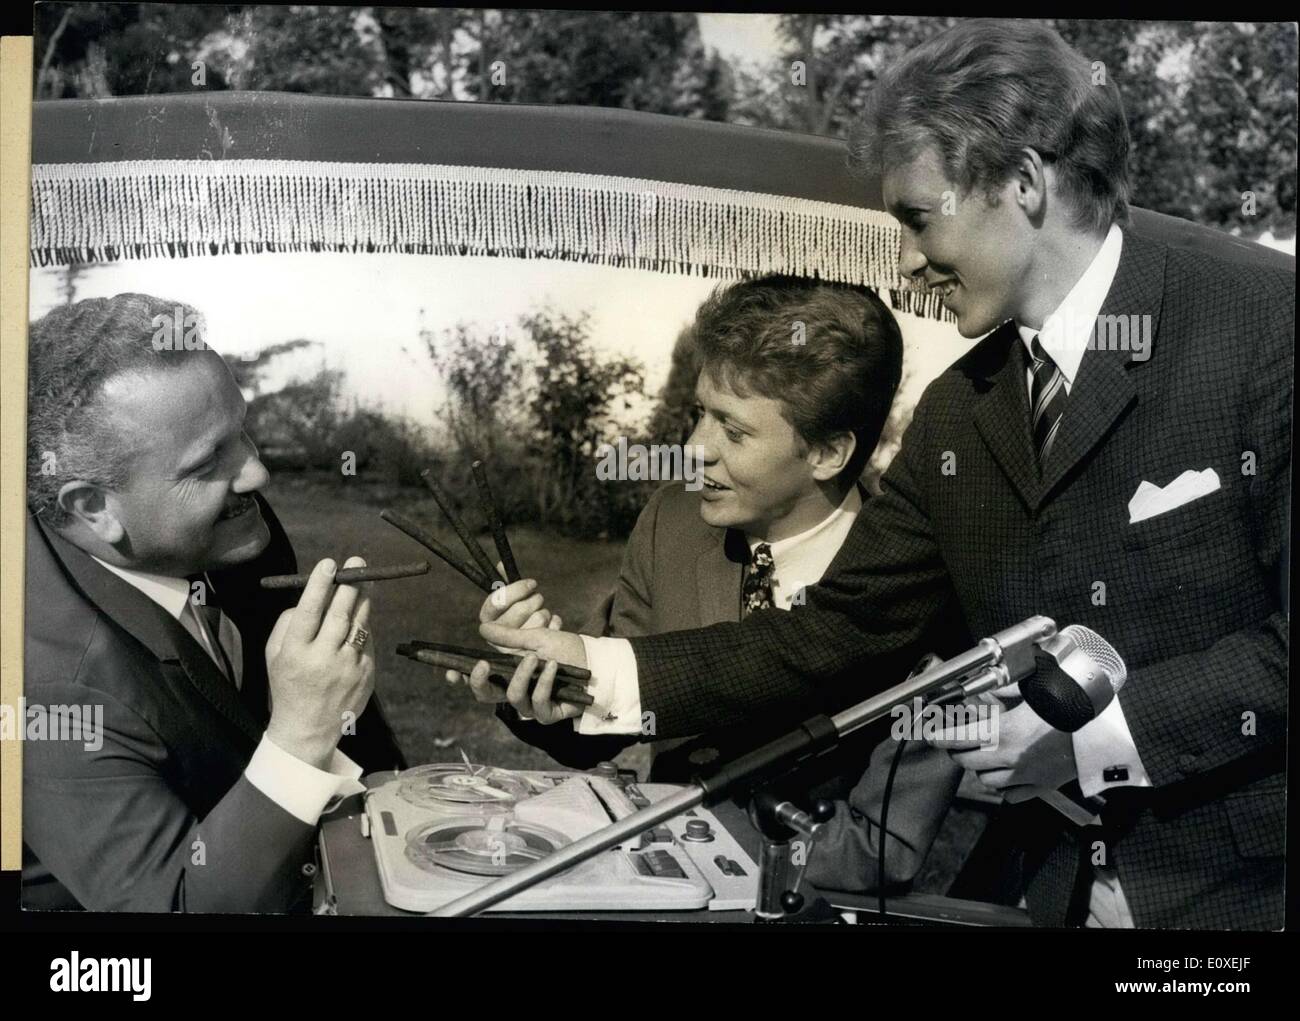 May 26, 1966 - The head of the musical Spier family receives a humorous allusion to the careers of his two sons in the form of two cigars from concert leader Willy Berking. Stock Photo